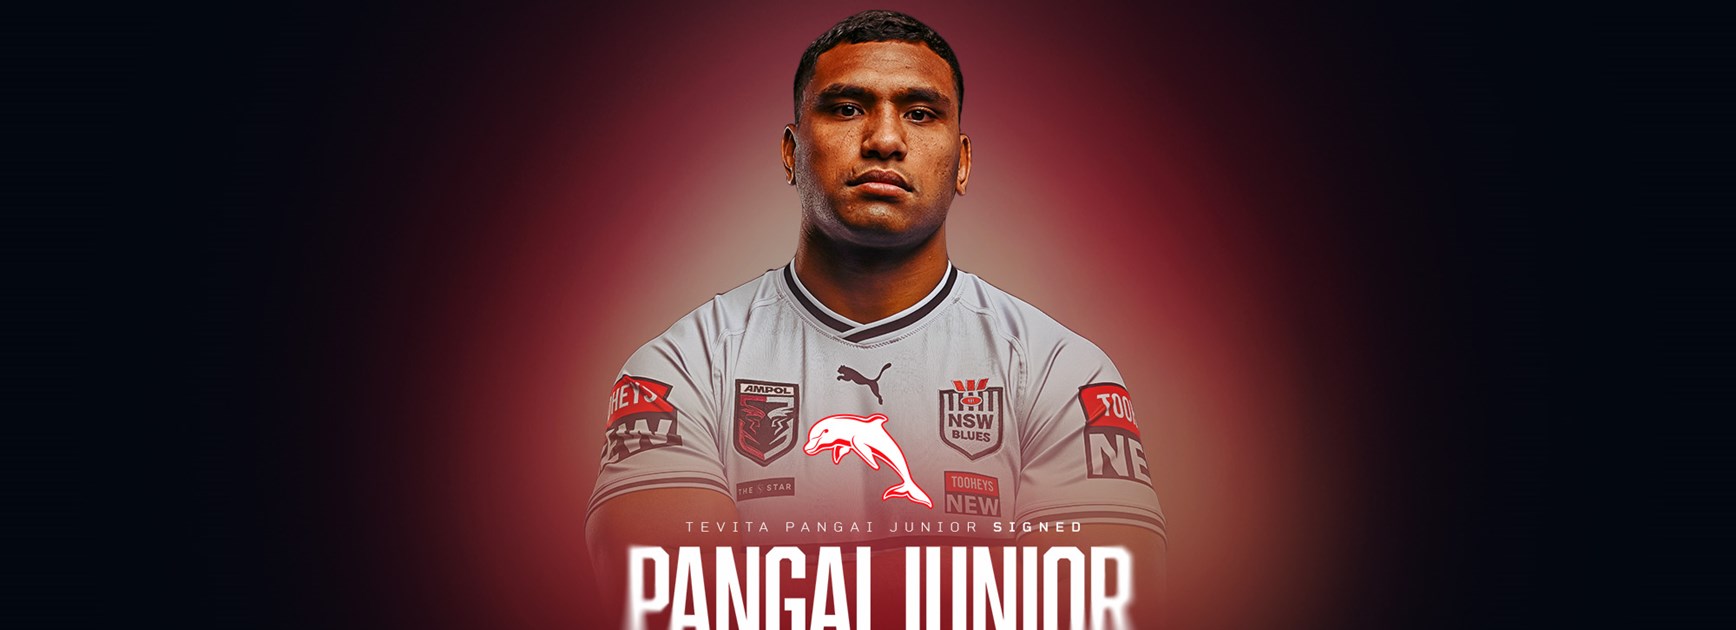 Pangai Junior joins the Dolphins